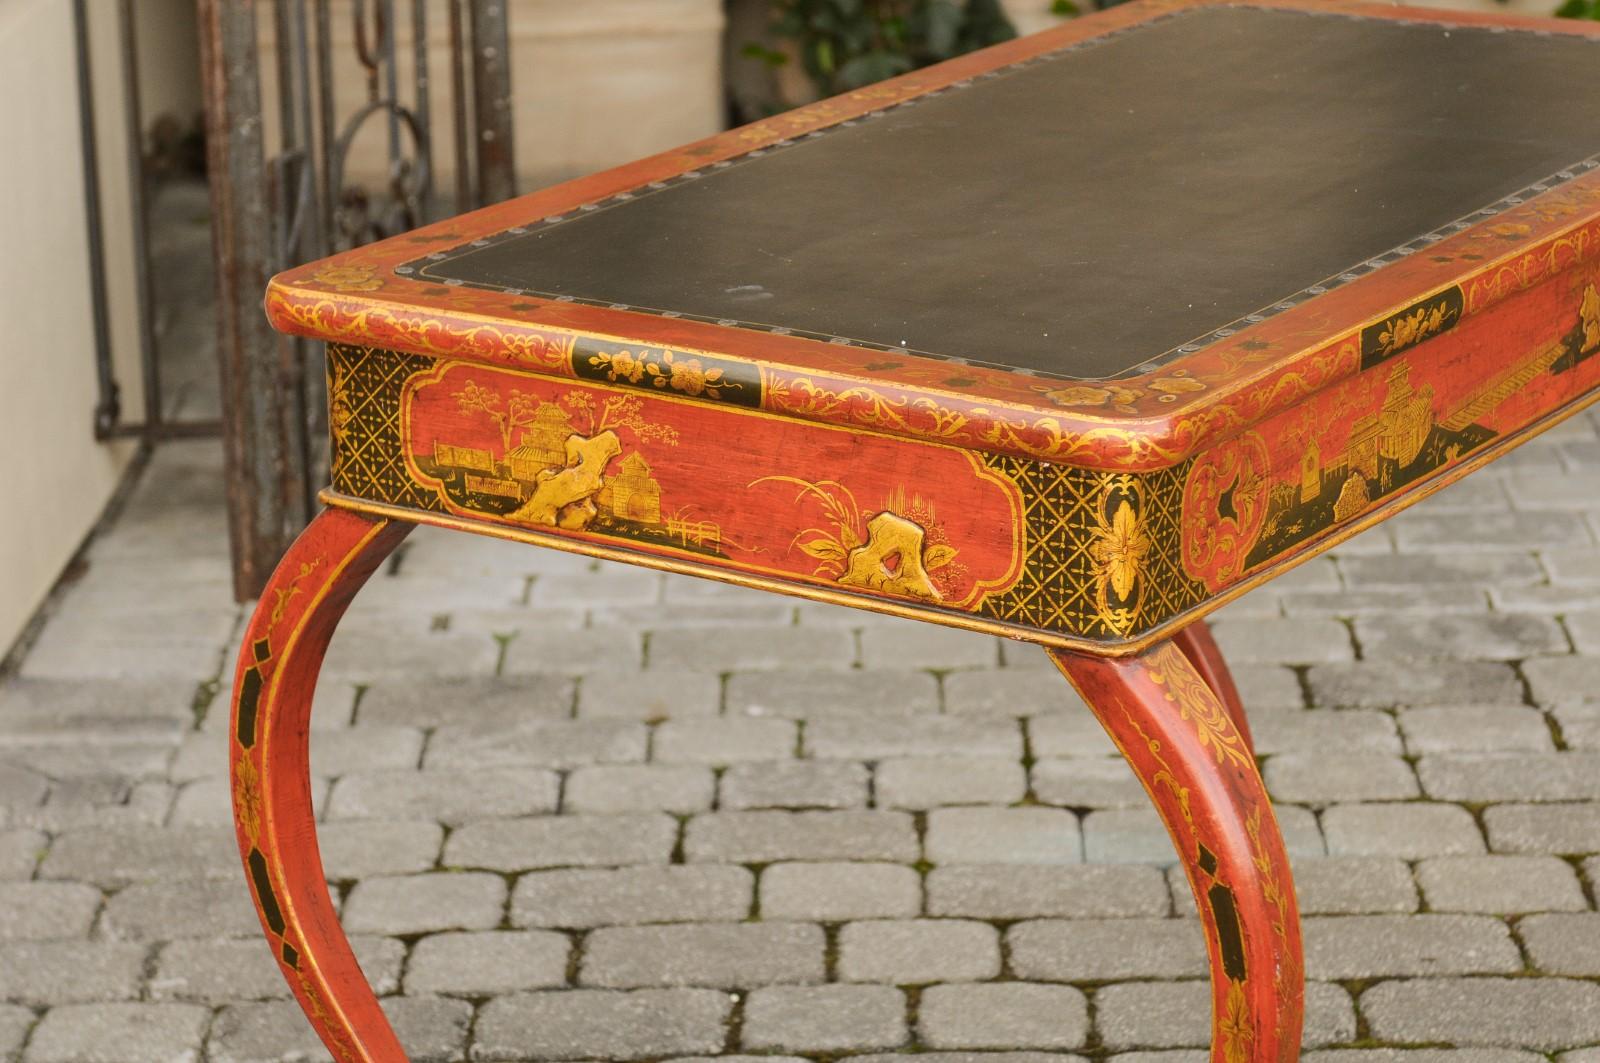 English Regency 1820s Table with Red Lacquered, Gold and Black Chinoiserie Decor For Sale 7